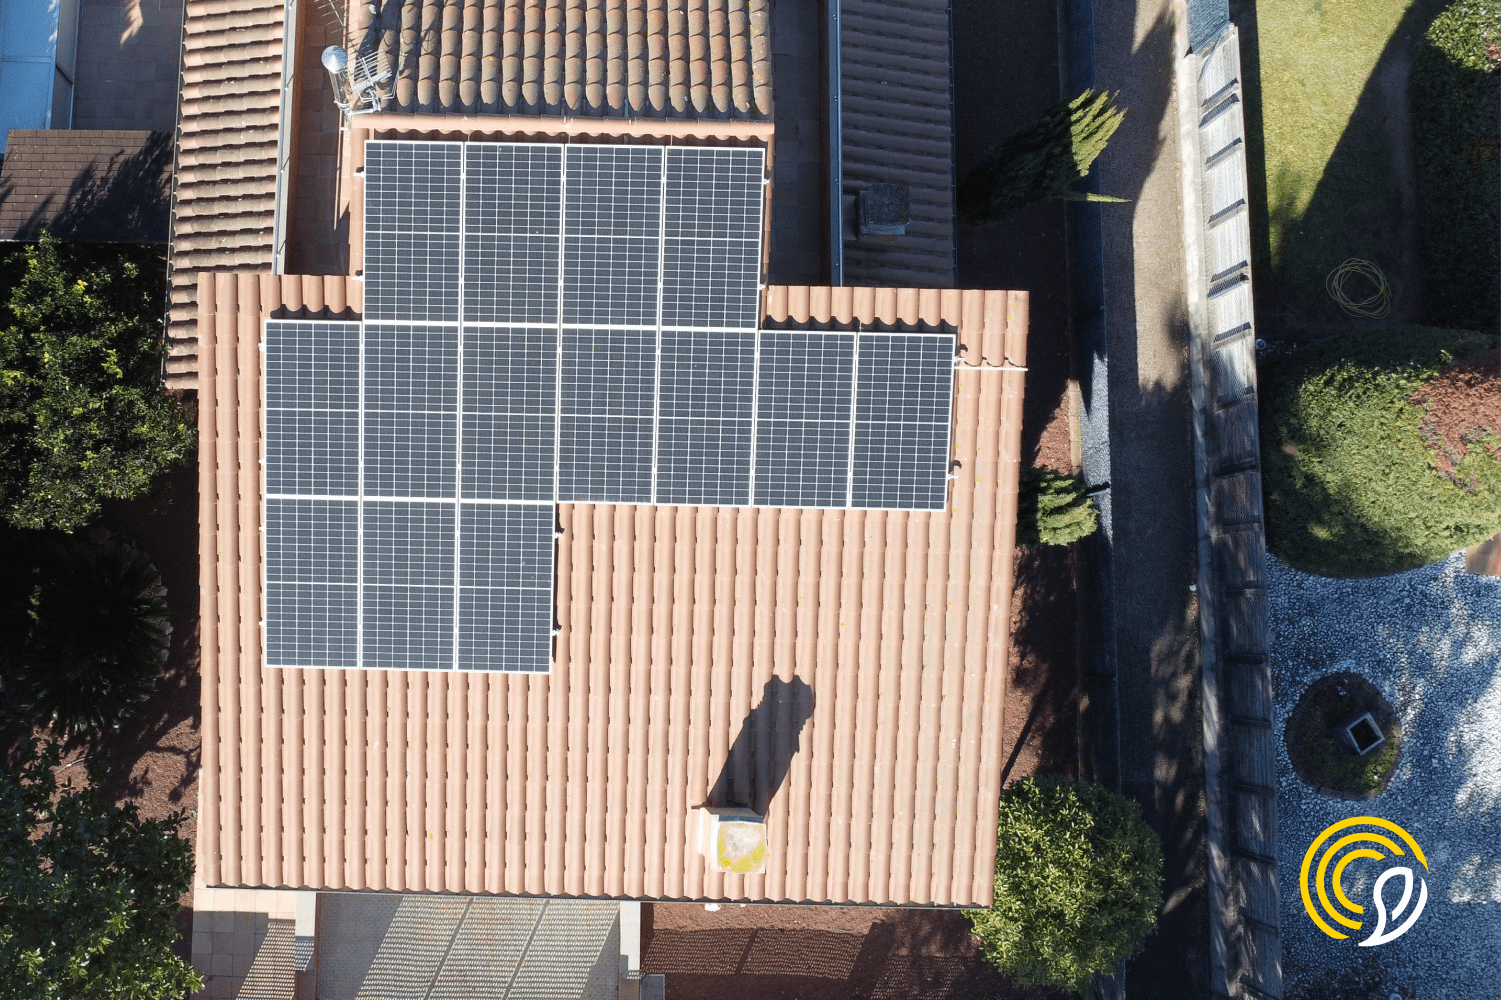 Solar energy is more profitable than real estate